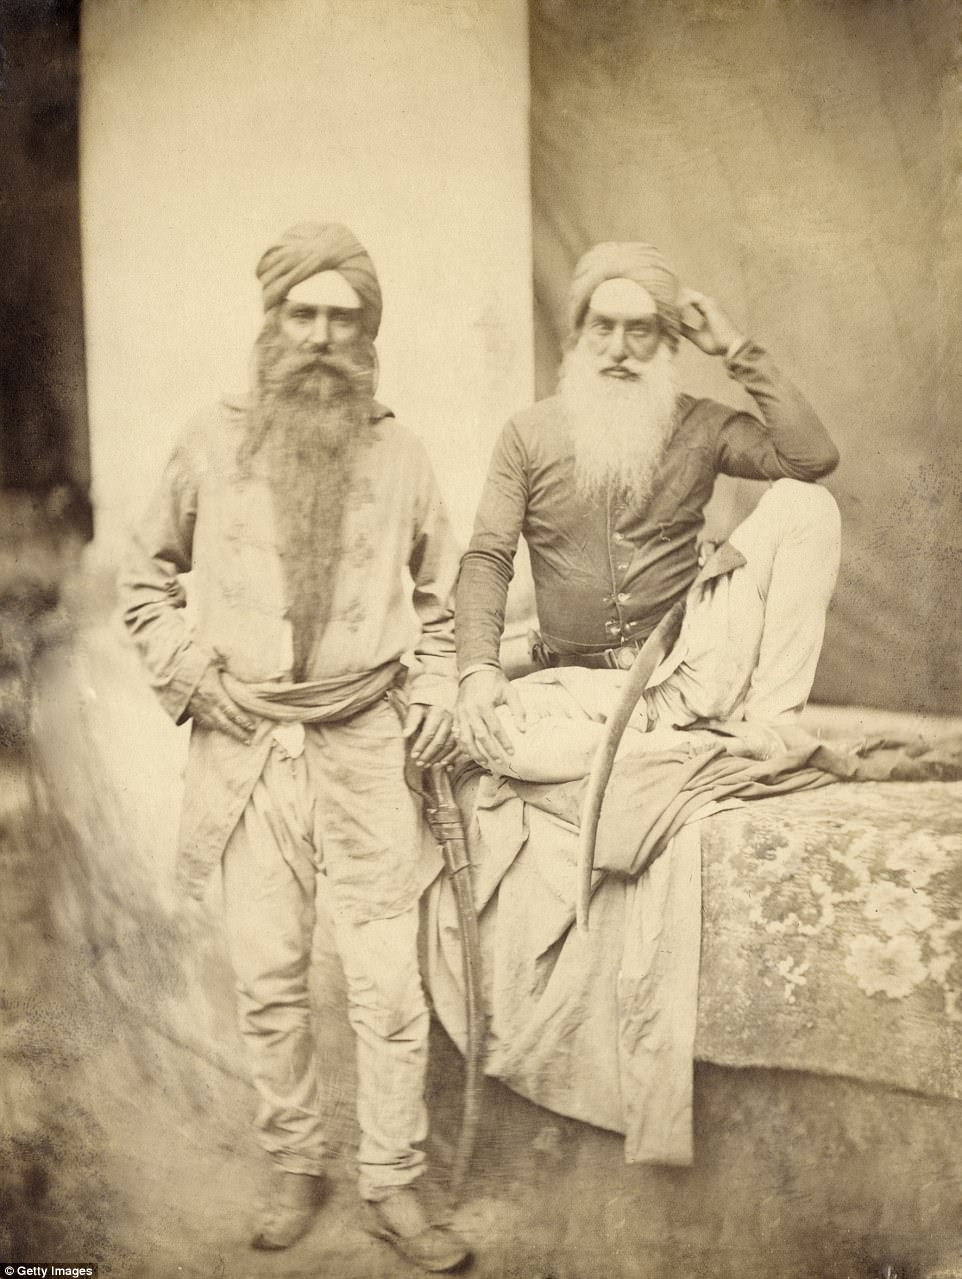 These Sikh officers were part of the Hodson's Horse, a cavalry regiment of the Indian Army. This photo, shot before the British Raj in 1857, is also included in the display of pictures given to Queen Victoria.